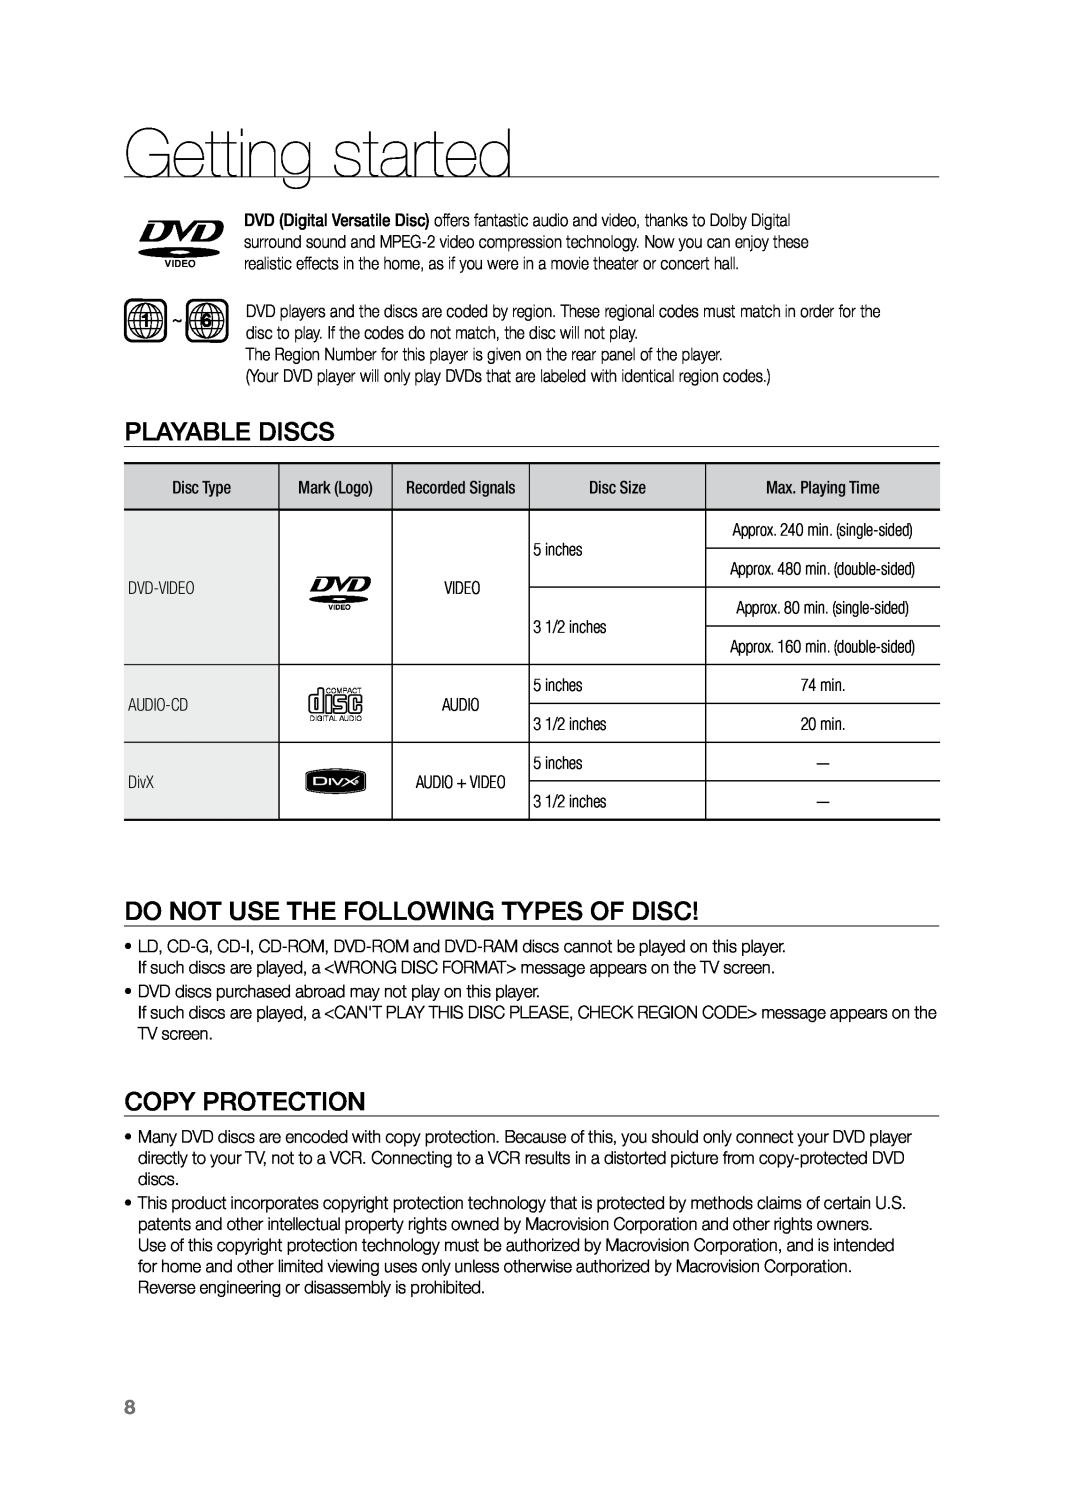 Samsung HT-Z221 user manual Playable Discs, Do not use the following types of disc, Copy Protection, Getting started 